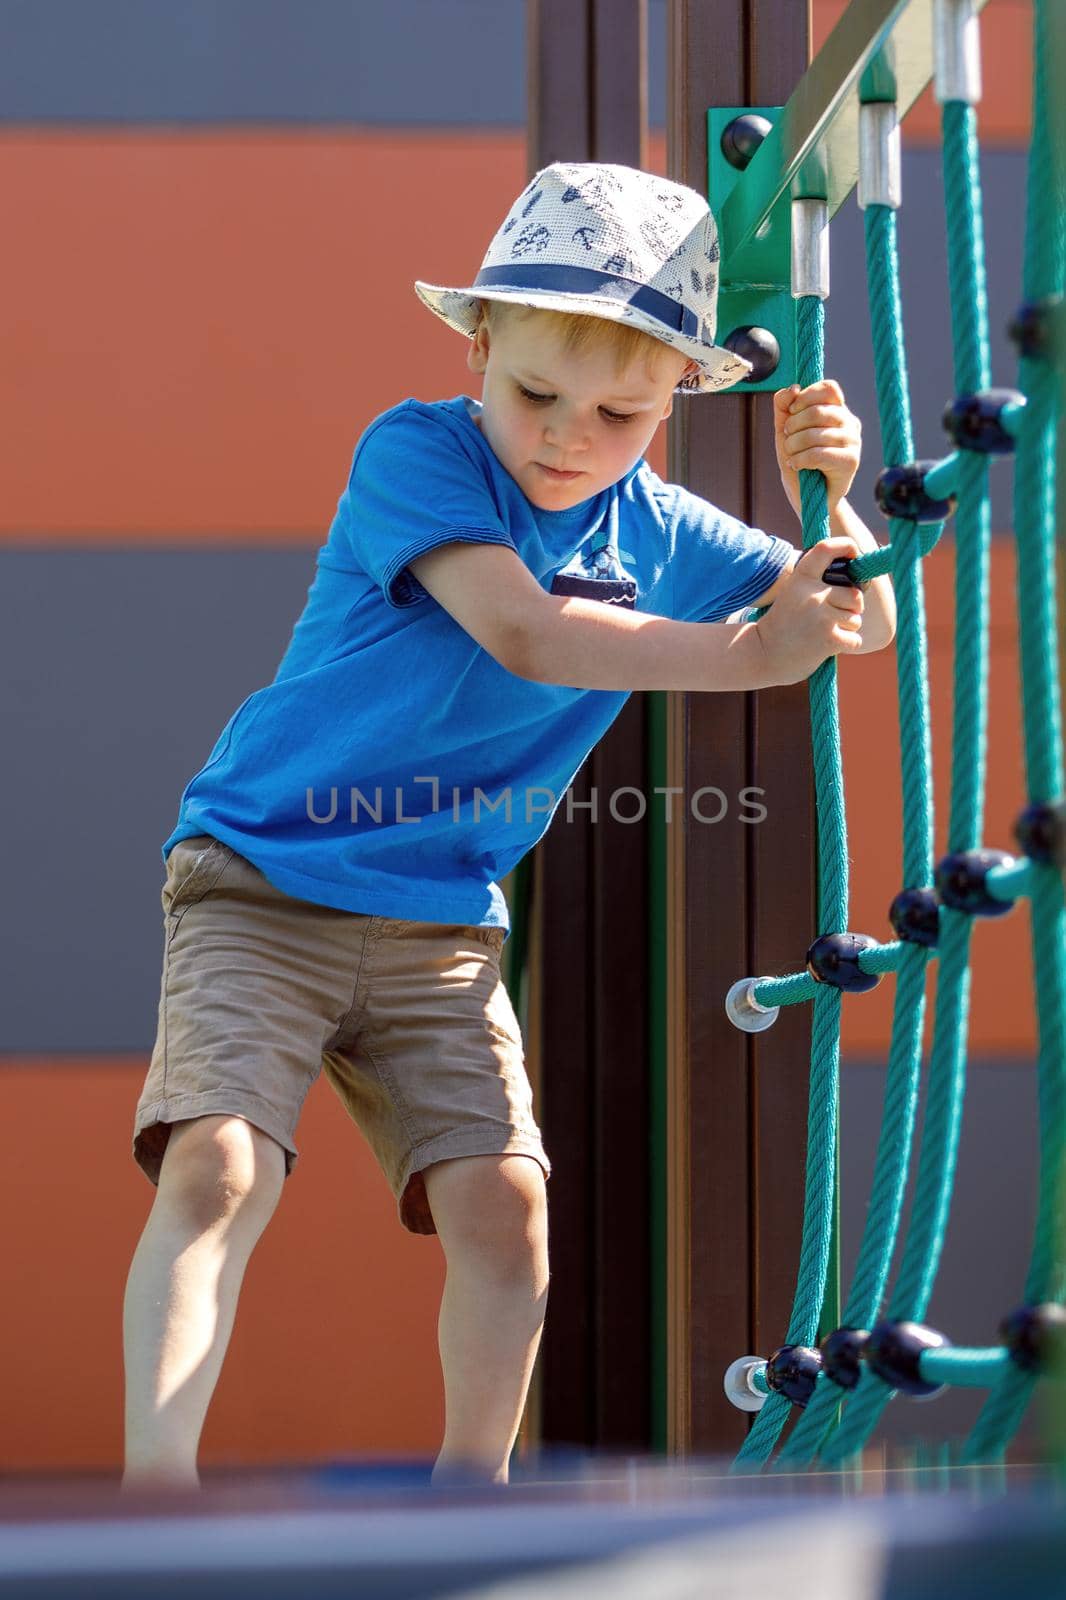 Low angle view of adorable little boy with hat having fun at playground. The child trains and carefully crosses the monkey bridge.